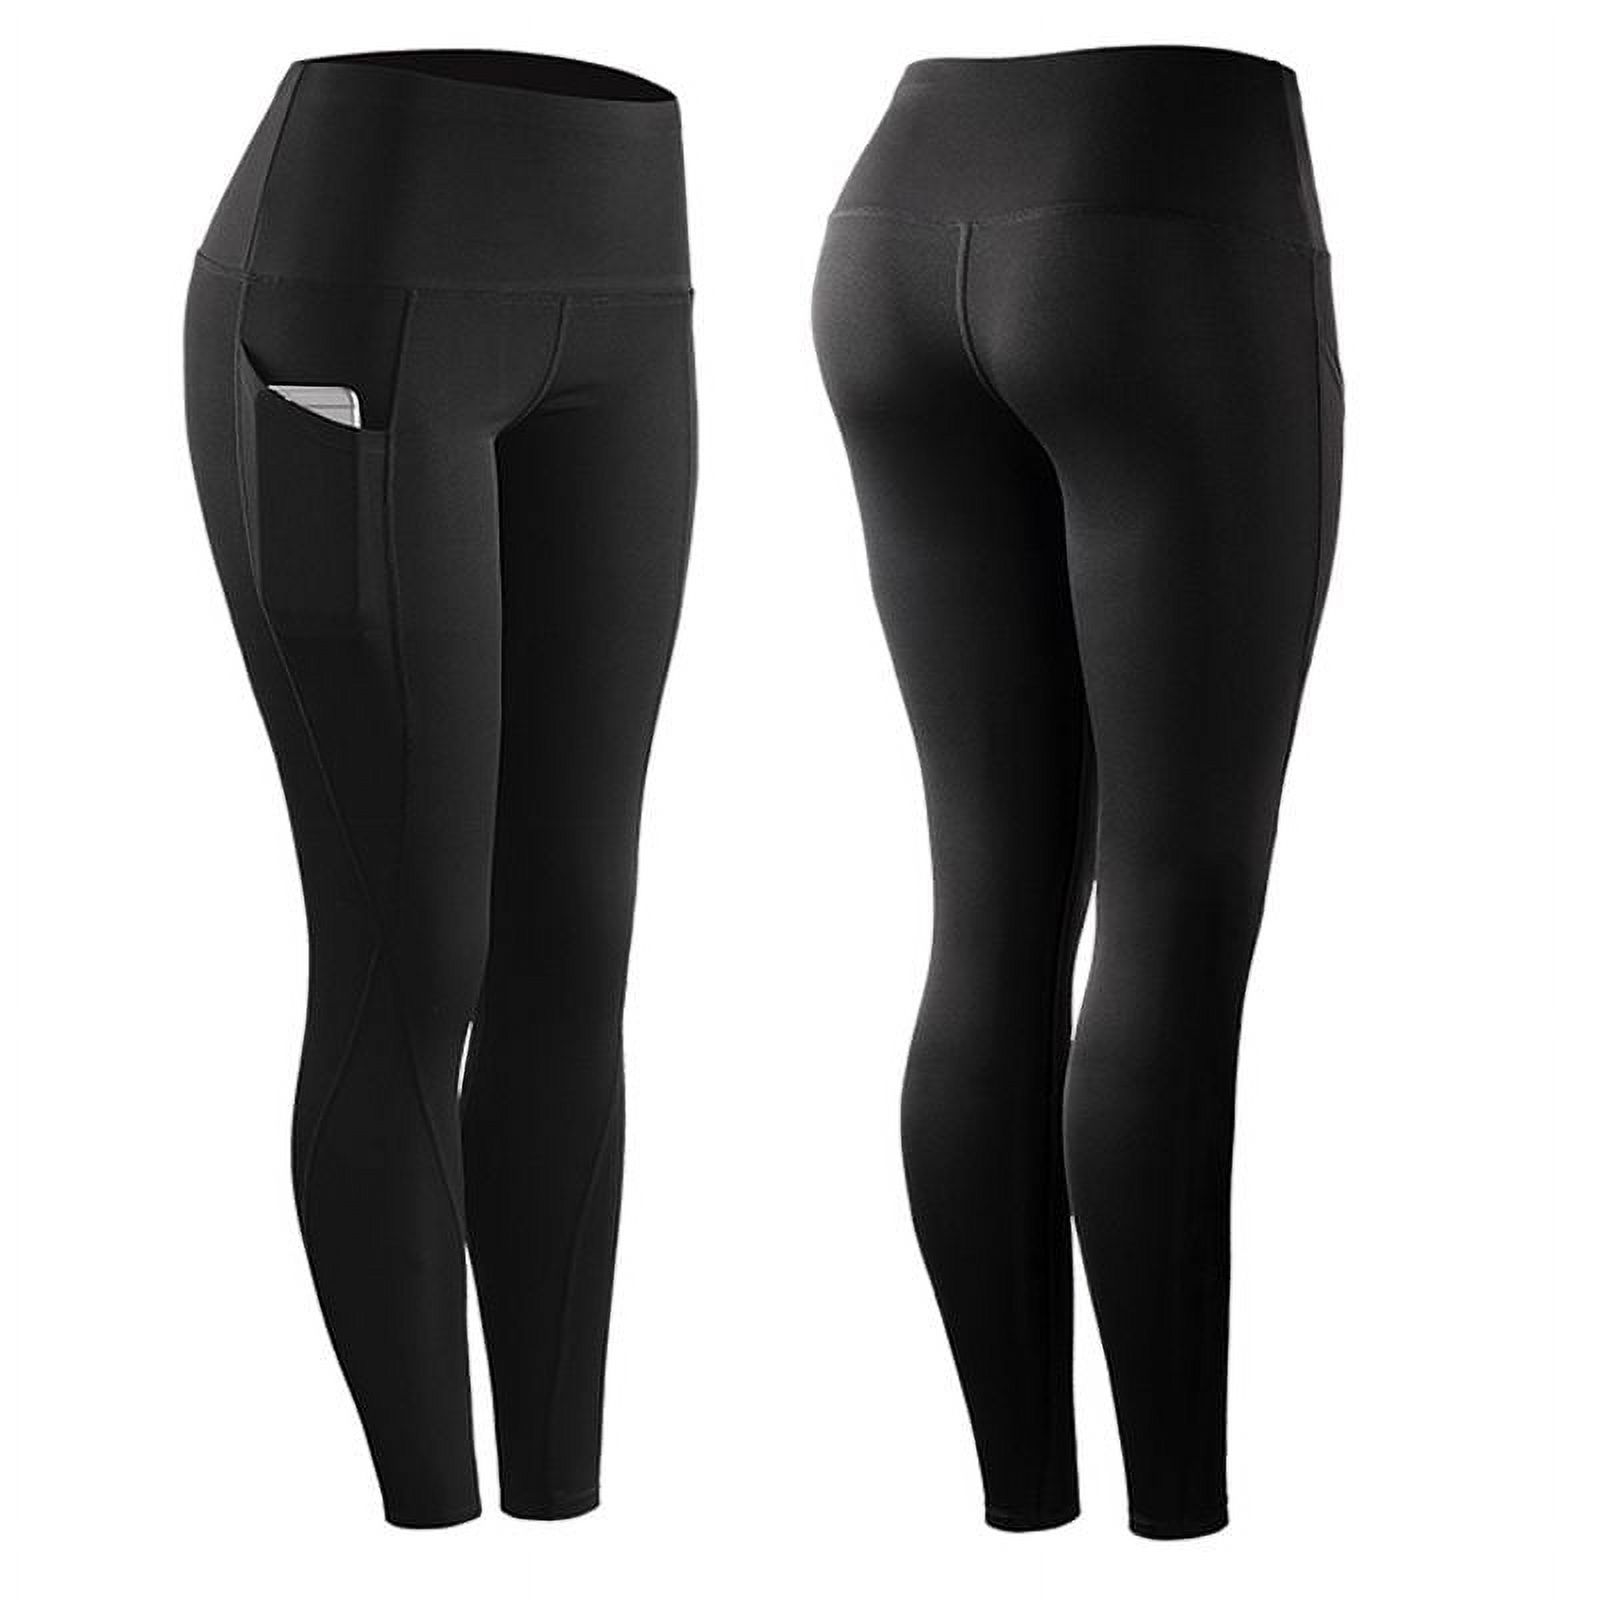 High Elastic Leggings Pant Women Solid Stretch Compression Sportswear Casual Yoga Jogging Leggings Pants With Pocket - image 3 of 6